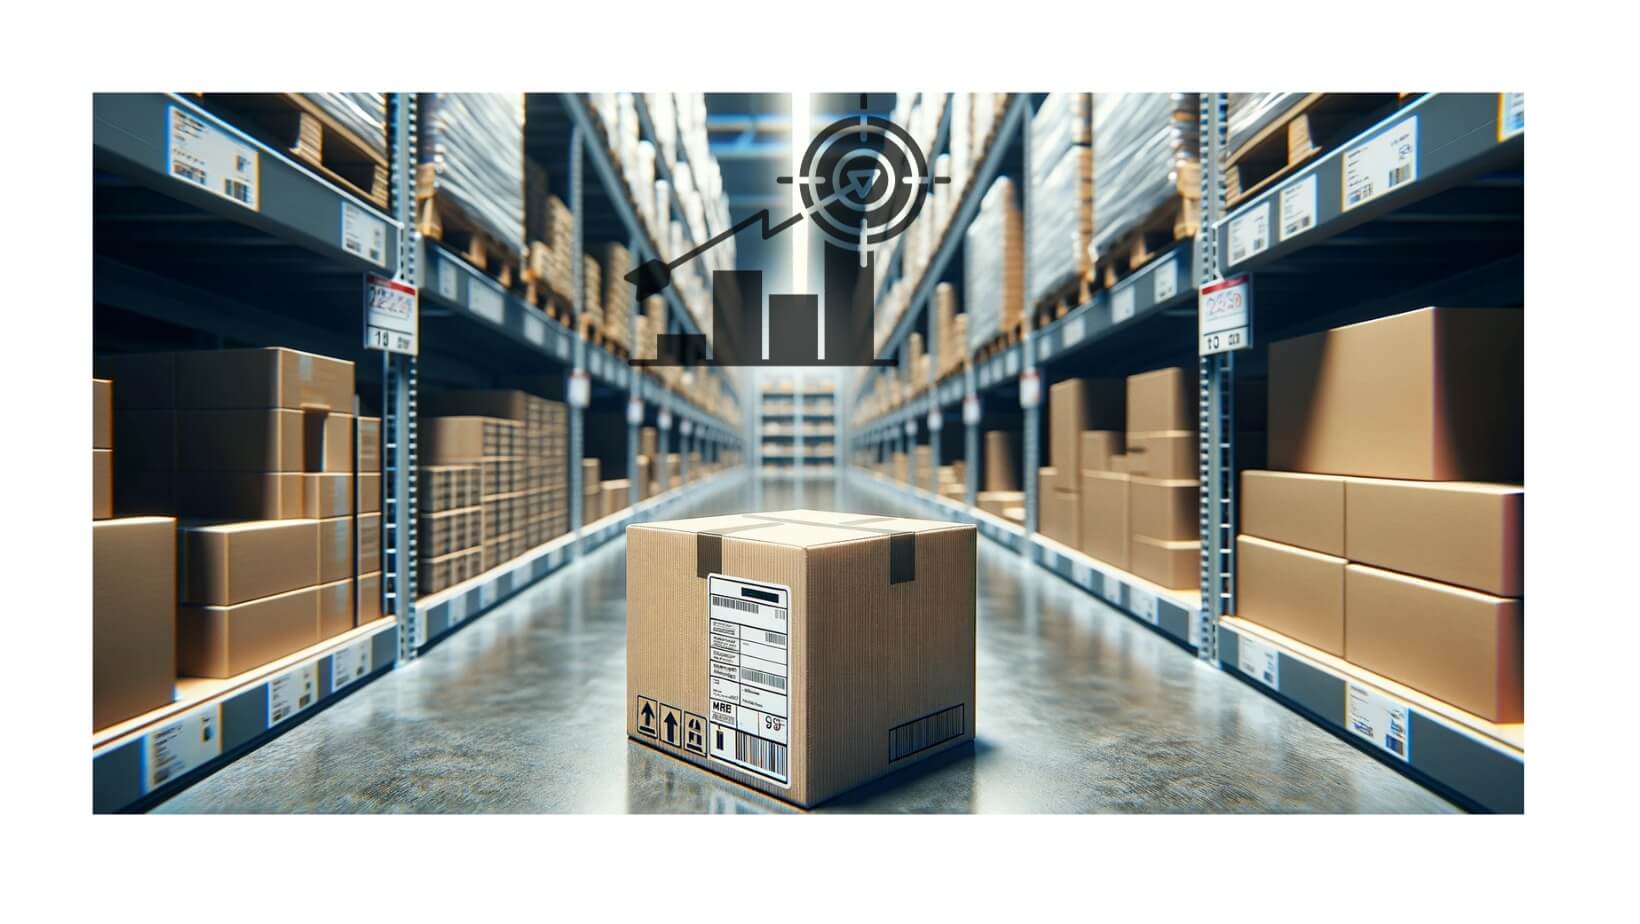 Photo of a well-organized retail warehouse, highlighting a detailed tag with blurred product shelves in the background, symbolizing efficient inventory management.